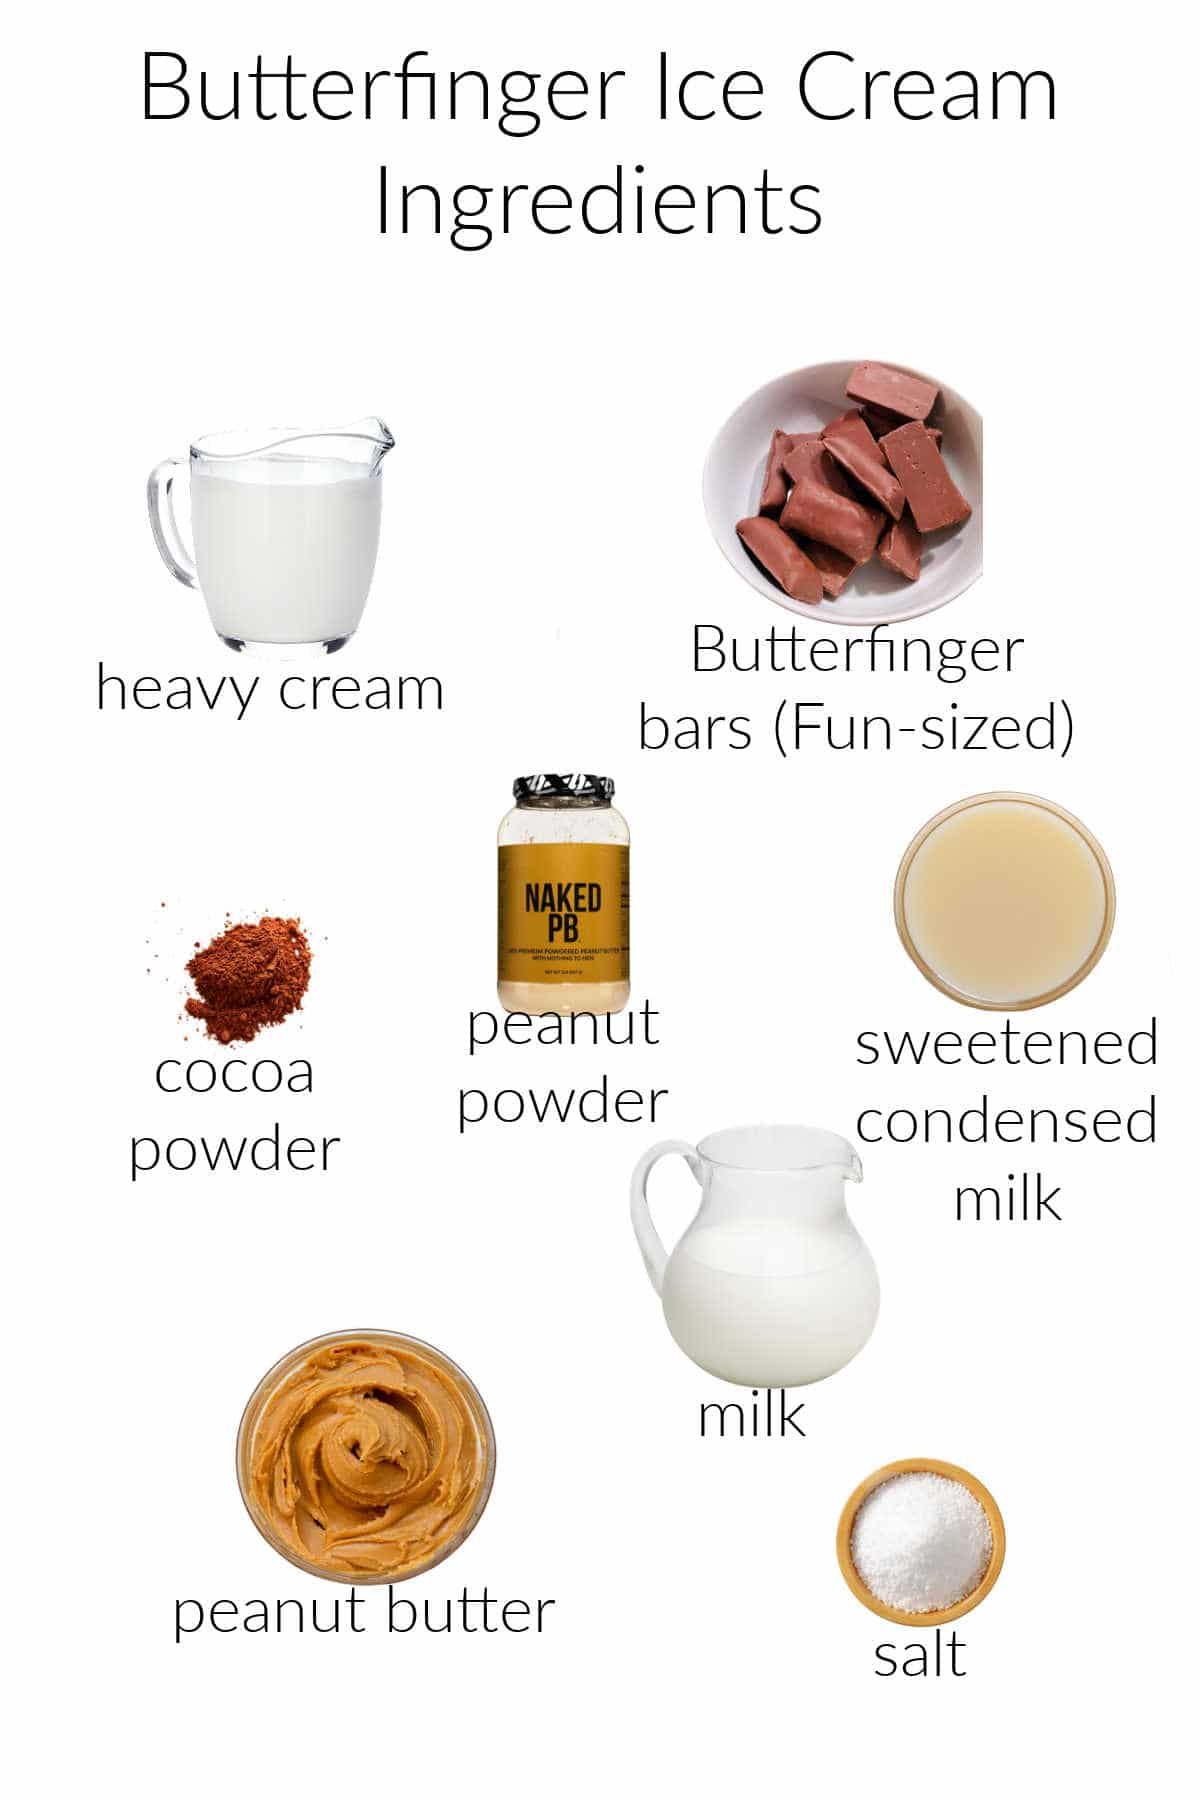 A collage of images of the ingredients for making Butterfinger ice cream: heavy cream, Butterfinger bars, cocoa powder, peanut butter powder, sweetened condensed milk, milk, peanut butter, and salt.